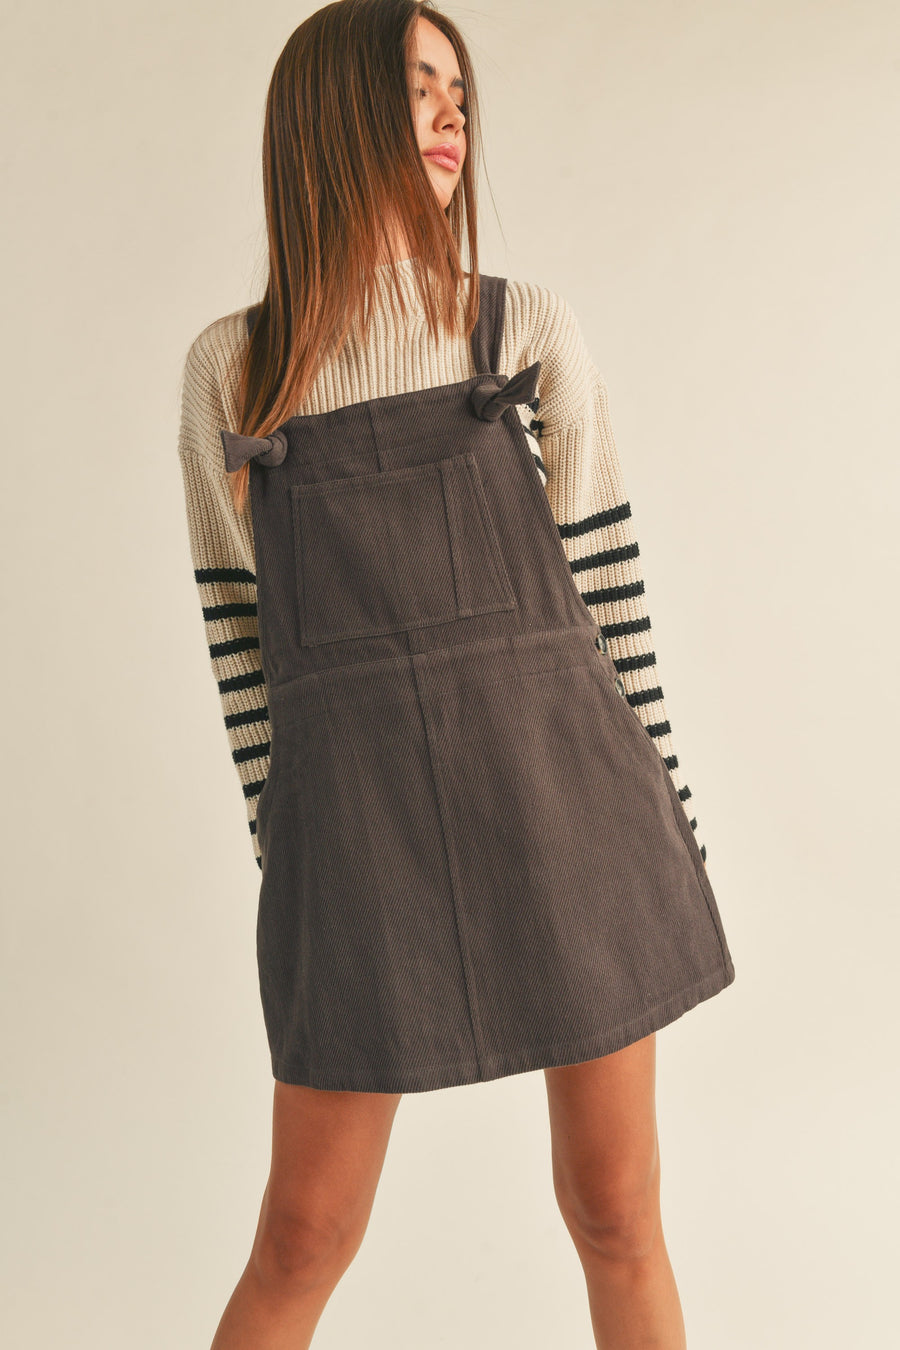 “Lee” Charcoal Cotton Overall Dress